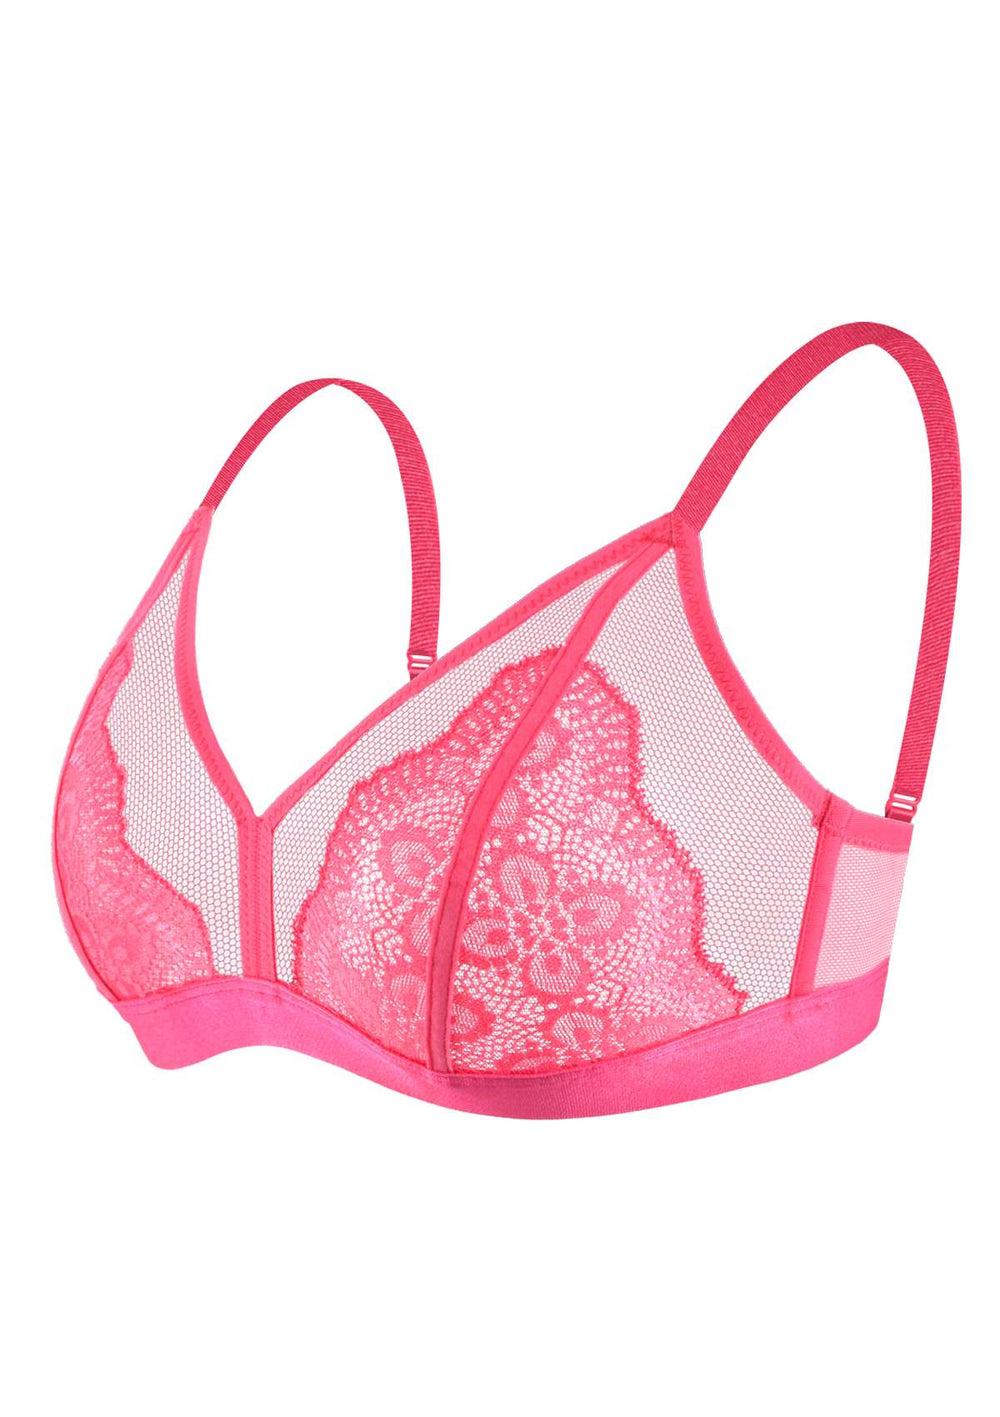 Lace Bralette With Sheer Mesh Triangle Cups and Long Line Body Ready to  Ship Size Medium Color Cameo Pink -  Canada